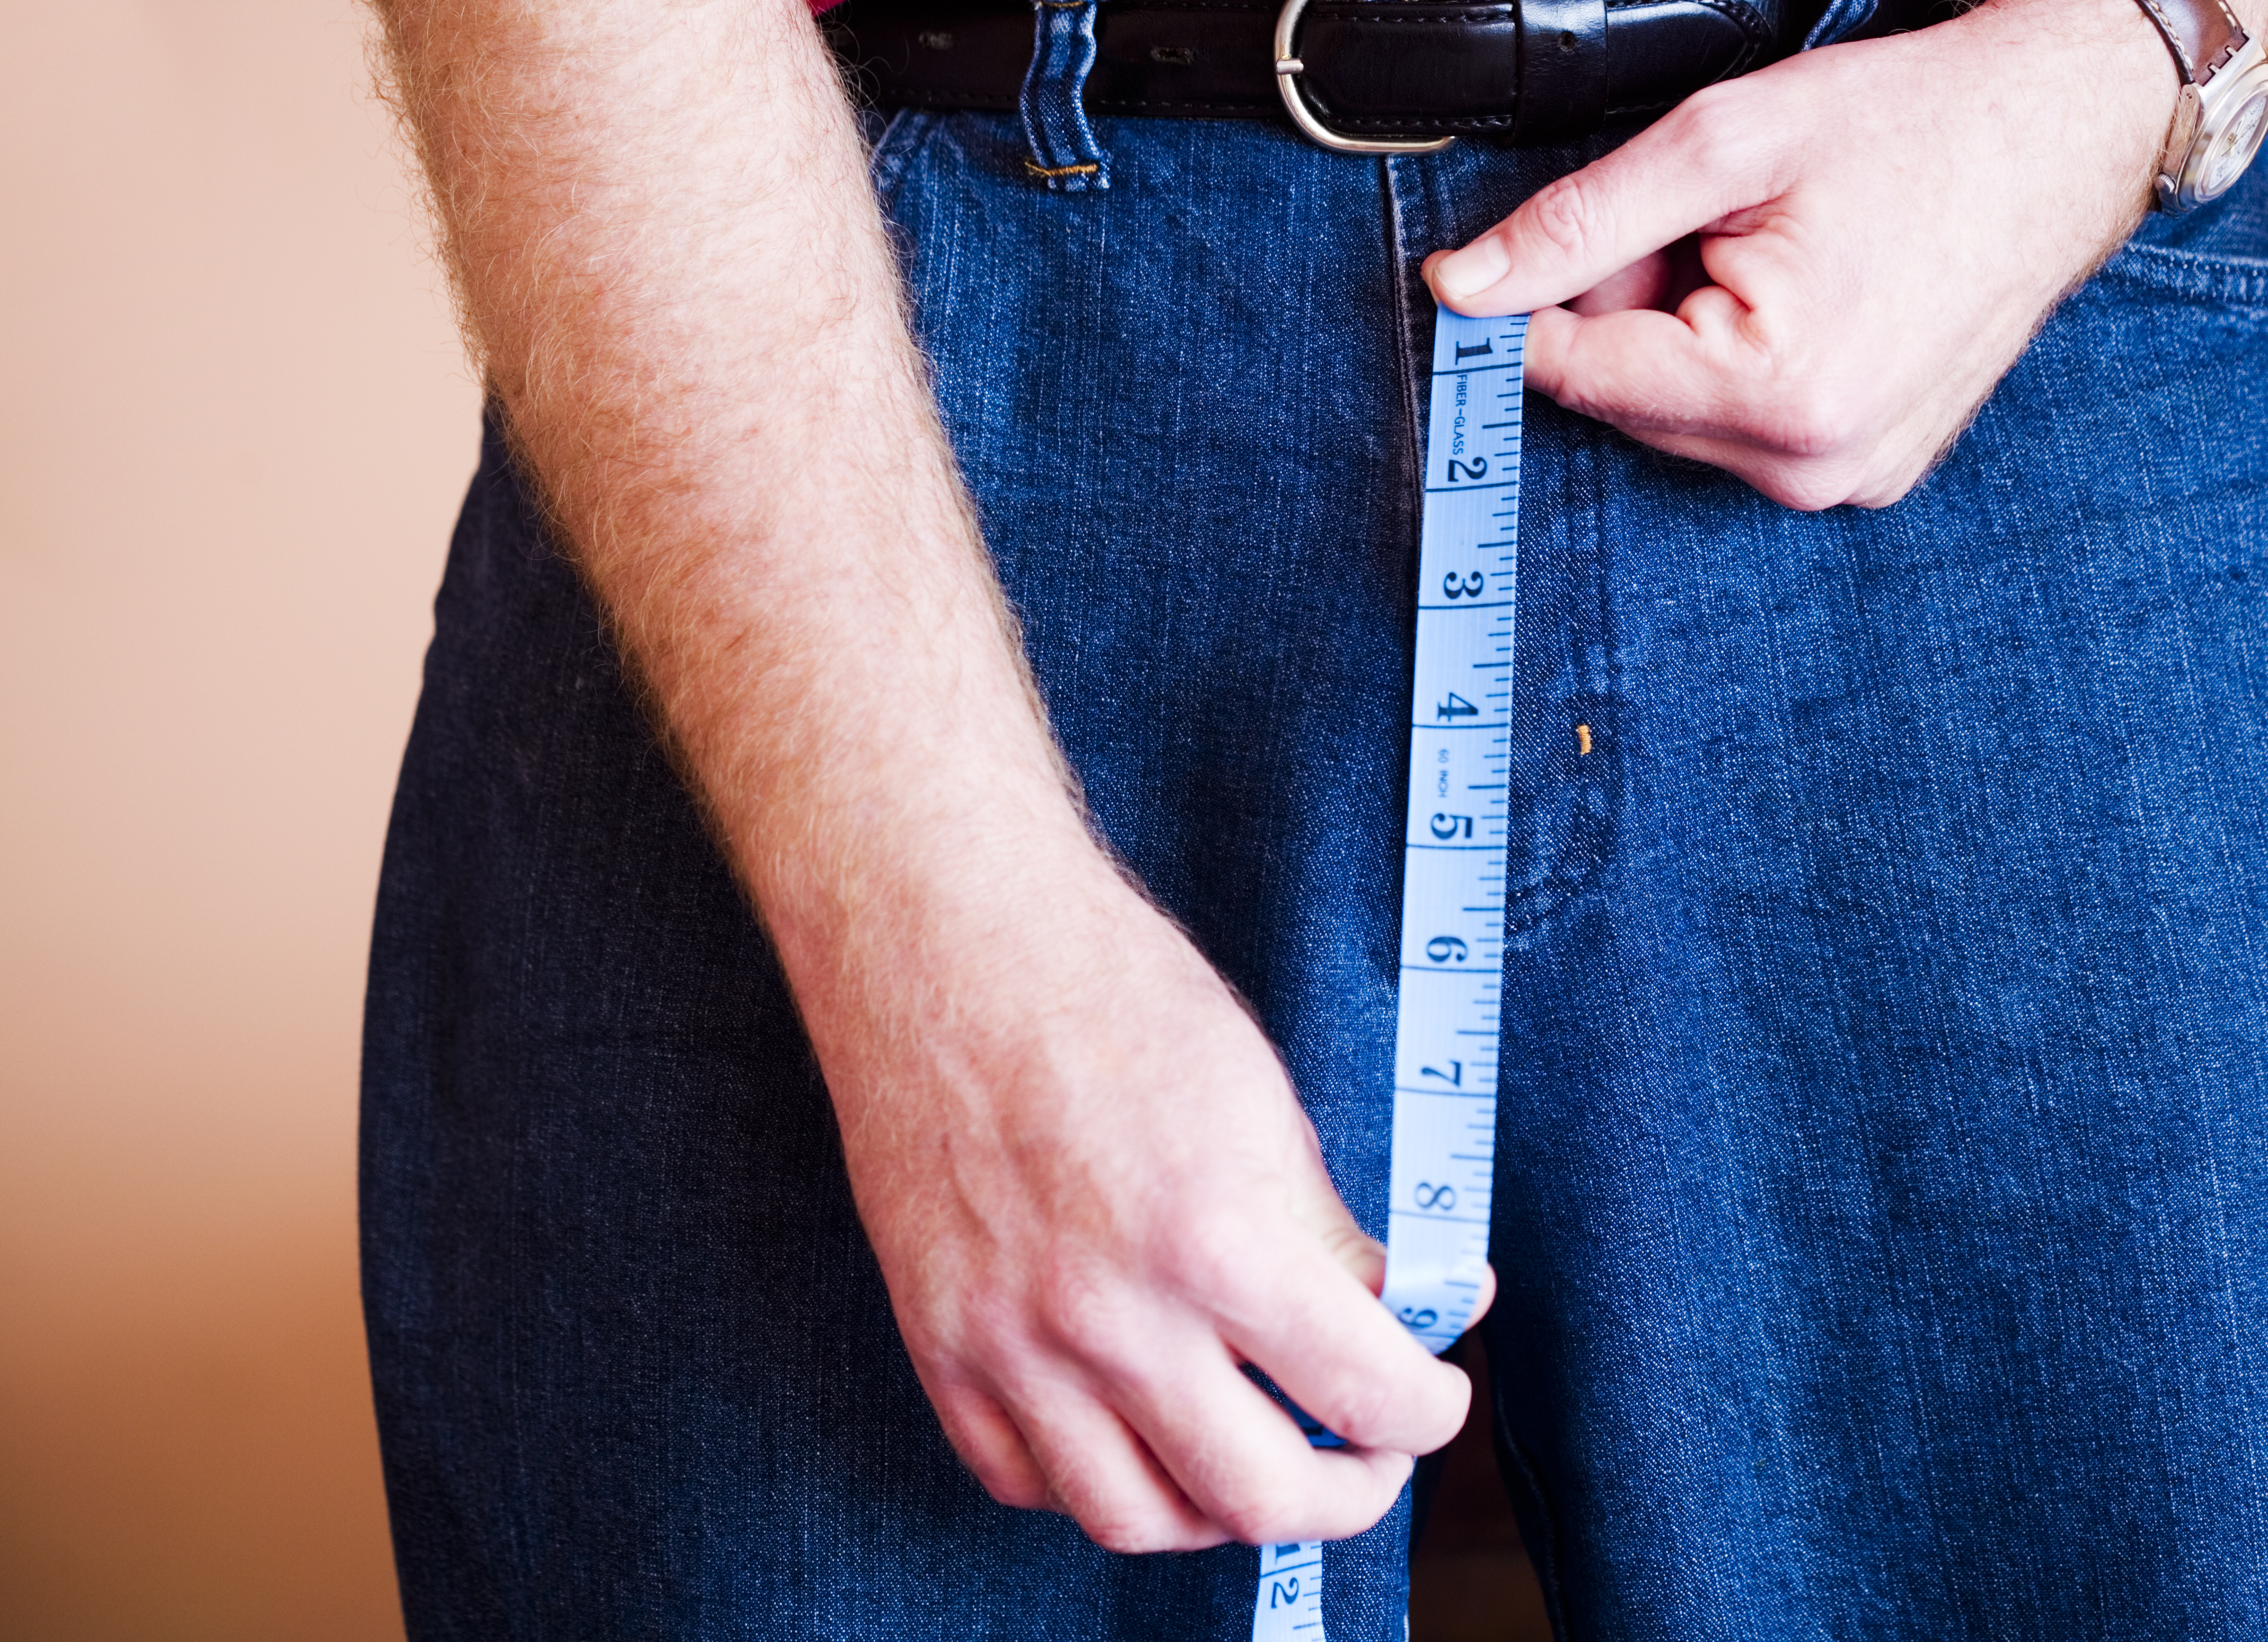 3% of men in the world have a penis larger than 22 cm (Photo: Getty Images)